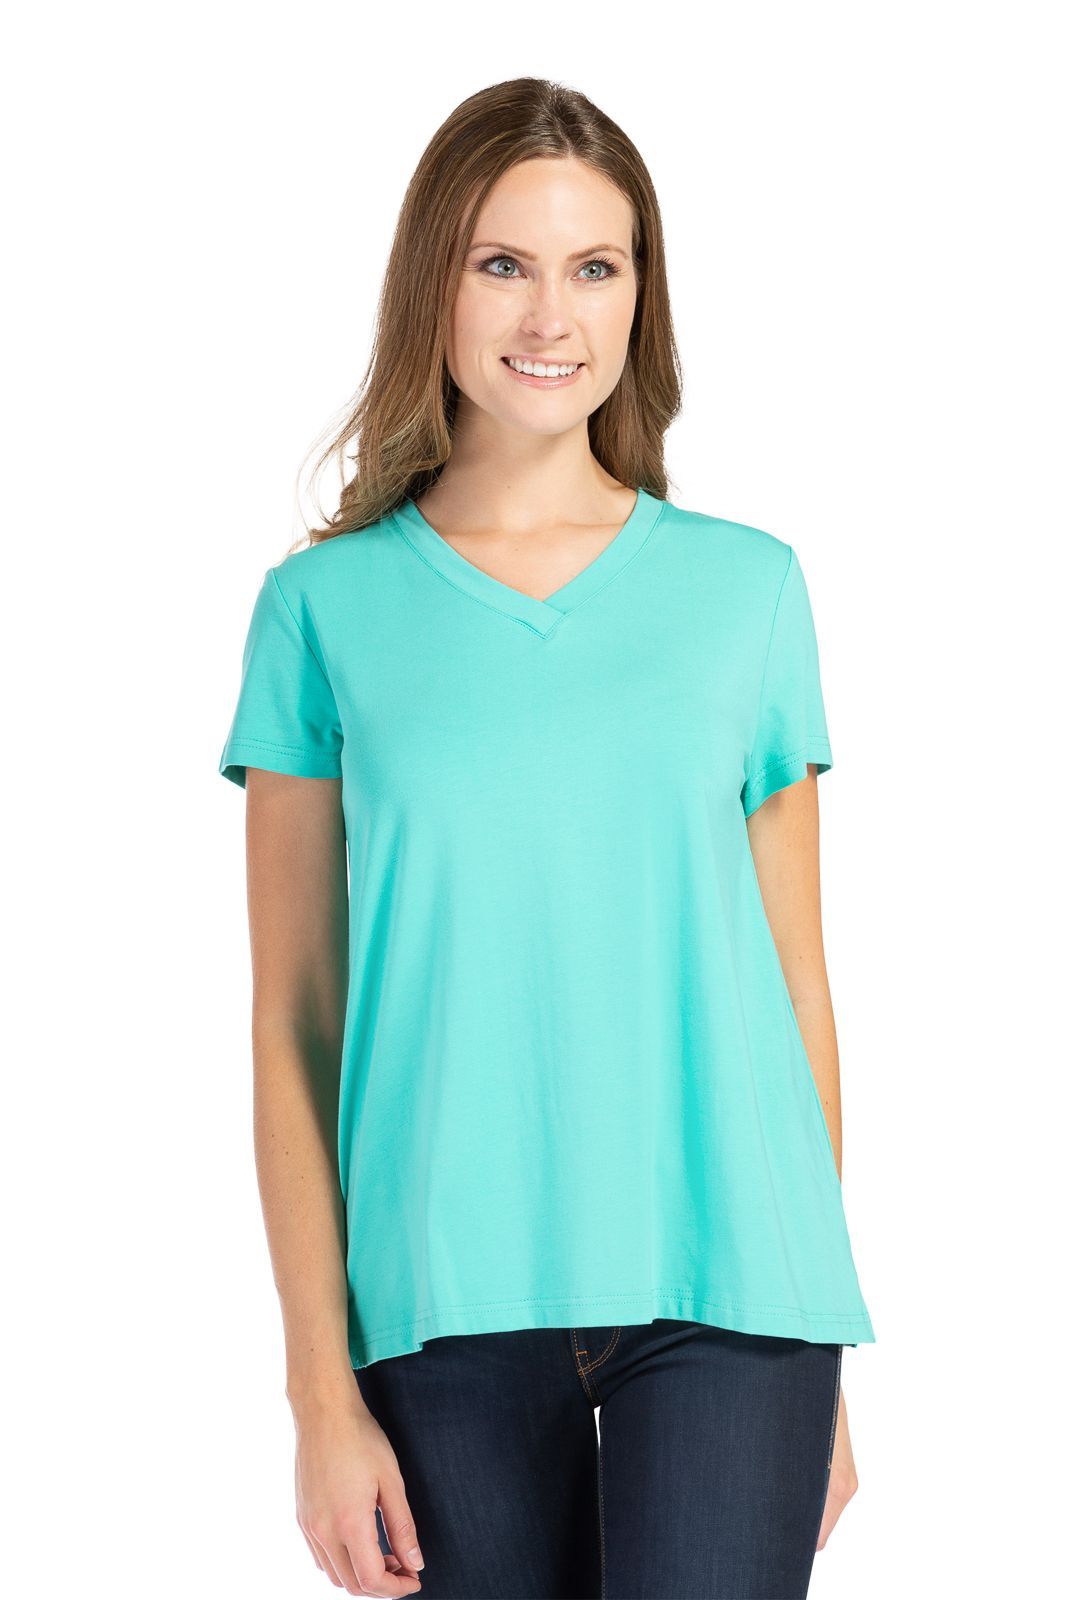 Women's Tees | Relaxed Fit V-Neck T-Shirts | Fishers Finery